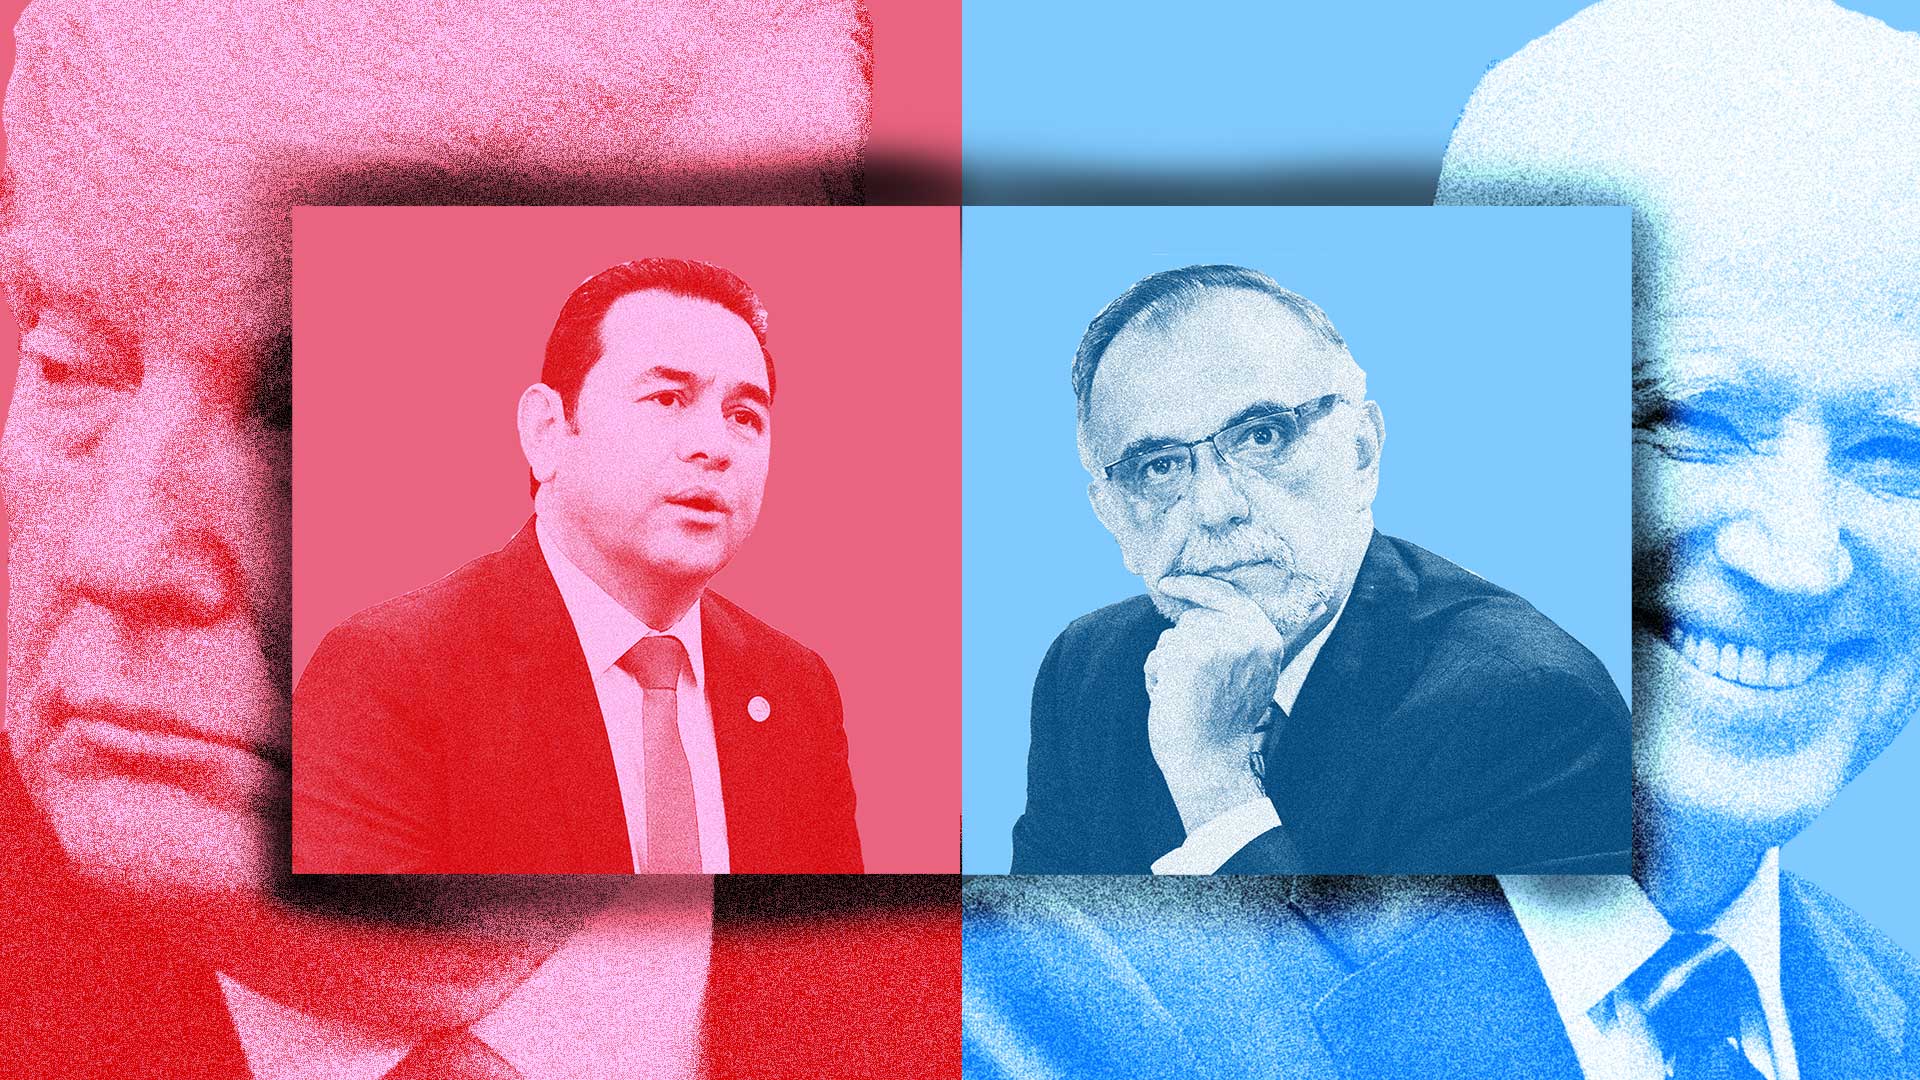 Photo illustration of a split image, with Jimmy Morales and Donald Trump in the background on the left side and Ivan Velasquez and Joe Biden on the right side. The left side has a red overlay and the right side has a blue overlay.